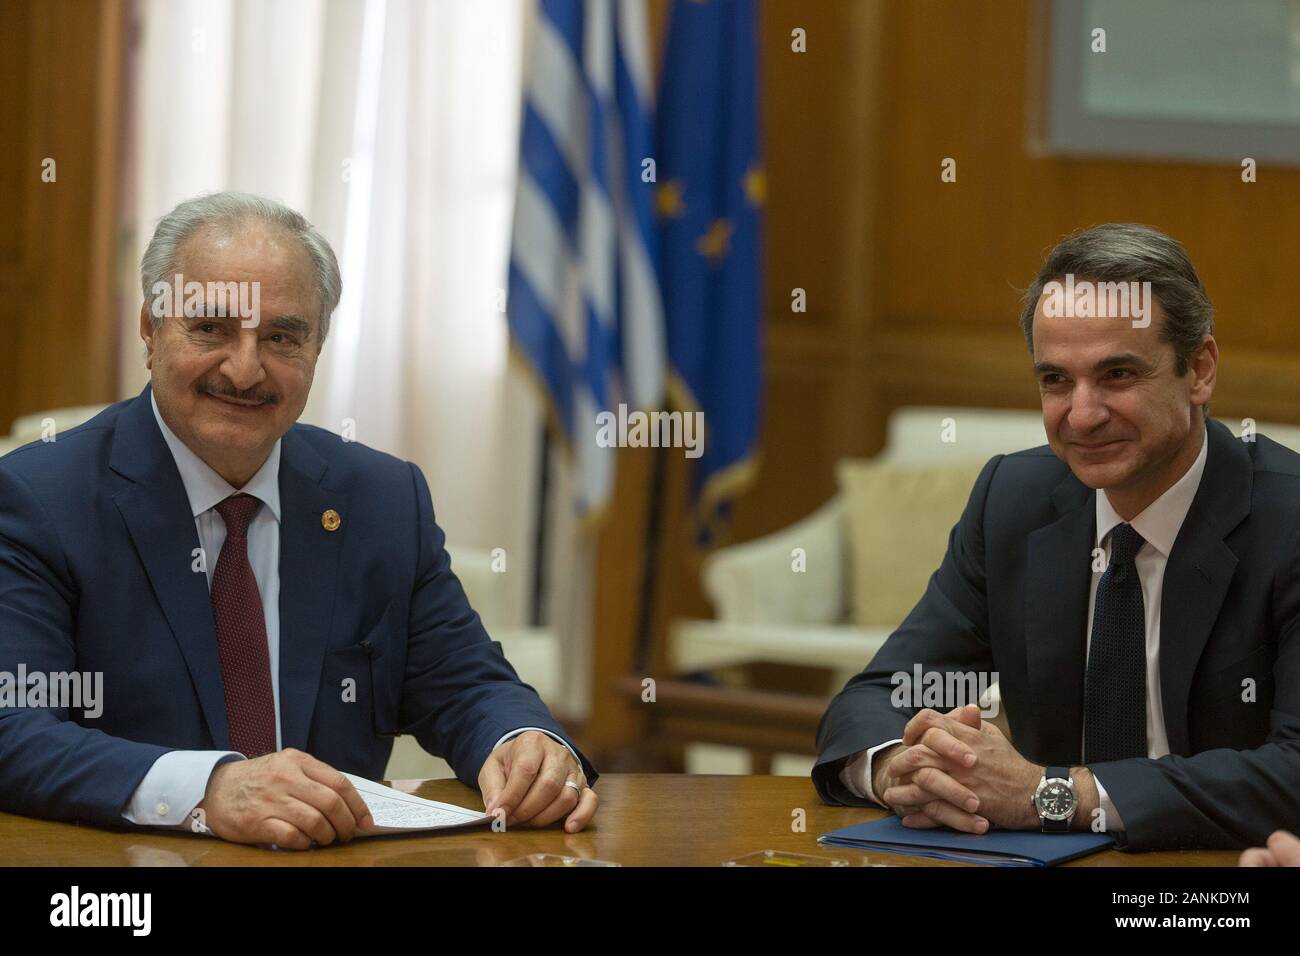 Athens, Greece. 17th Jan, 2020. Greek Prime Minister Kyriakos Mitsotakis (R) meets with Khalifa Haftar, commander of the Libyan National Army (LNA), in Athens, Greece, on Jan. 17, 2020. Greece is ready to help Libya going forward once a solution is found to the conflict there, Greek Foreign Minister Nikos Dendias told the press here on Friday following his meeting with Khalifa Haftar, commander of the Libyan National Army (LNA). Credit: Marios Lolos/Xinhua/Alamy Live News Stock Photo